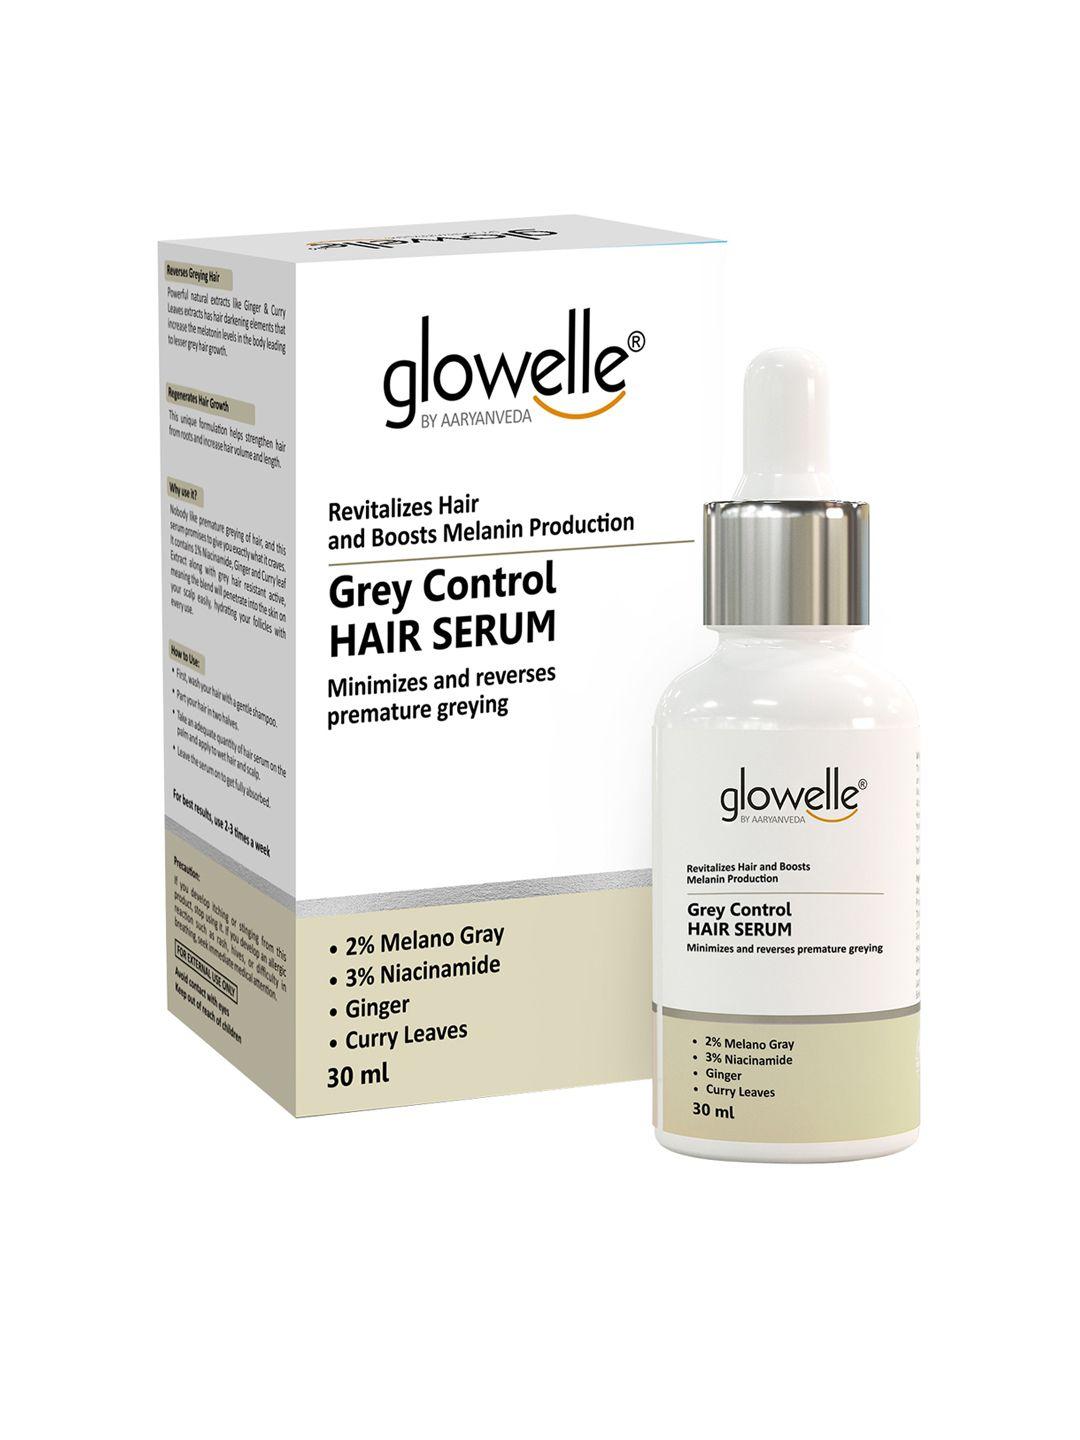 aryanveda glowelle grey coverage hair serum to revitalize hair with ginger - 30 ml